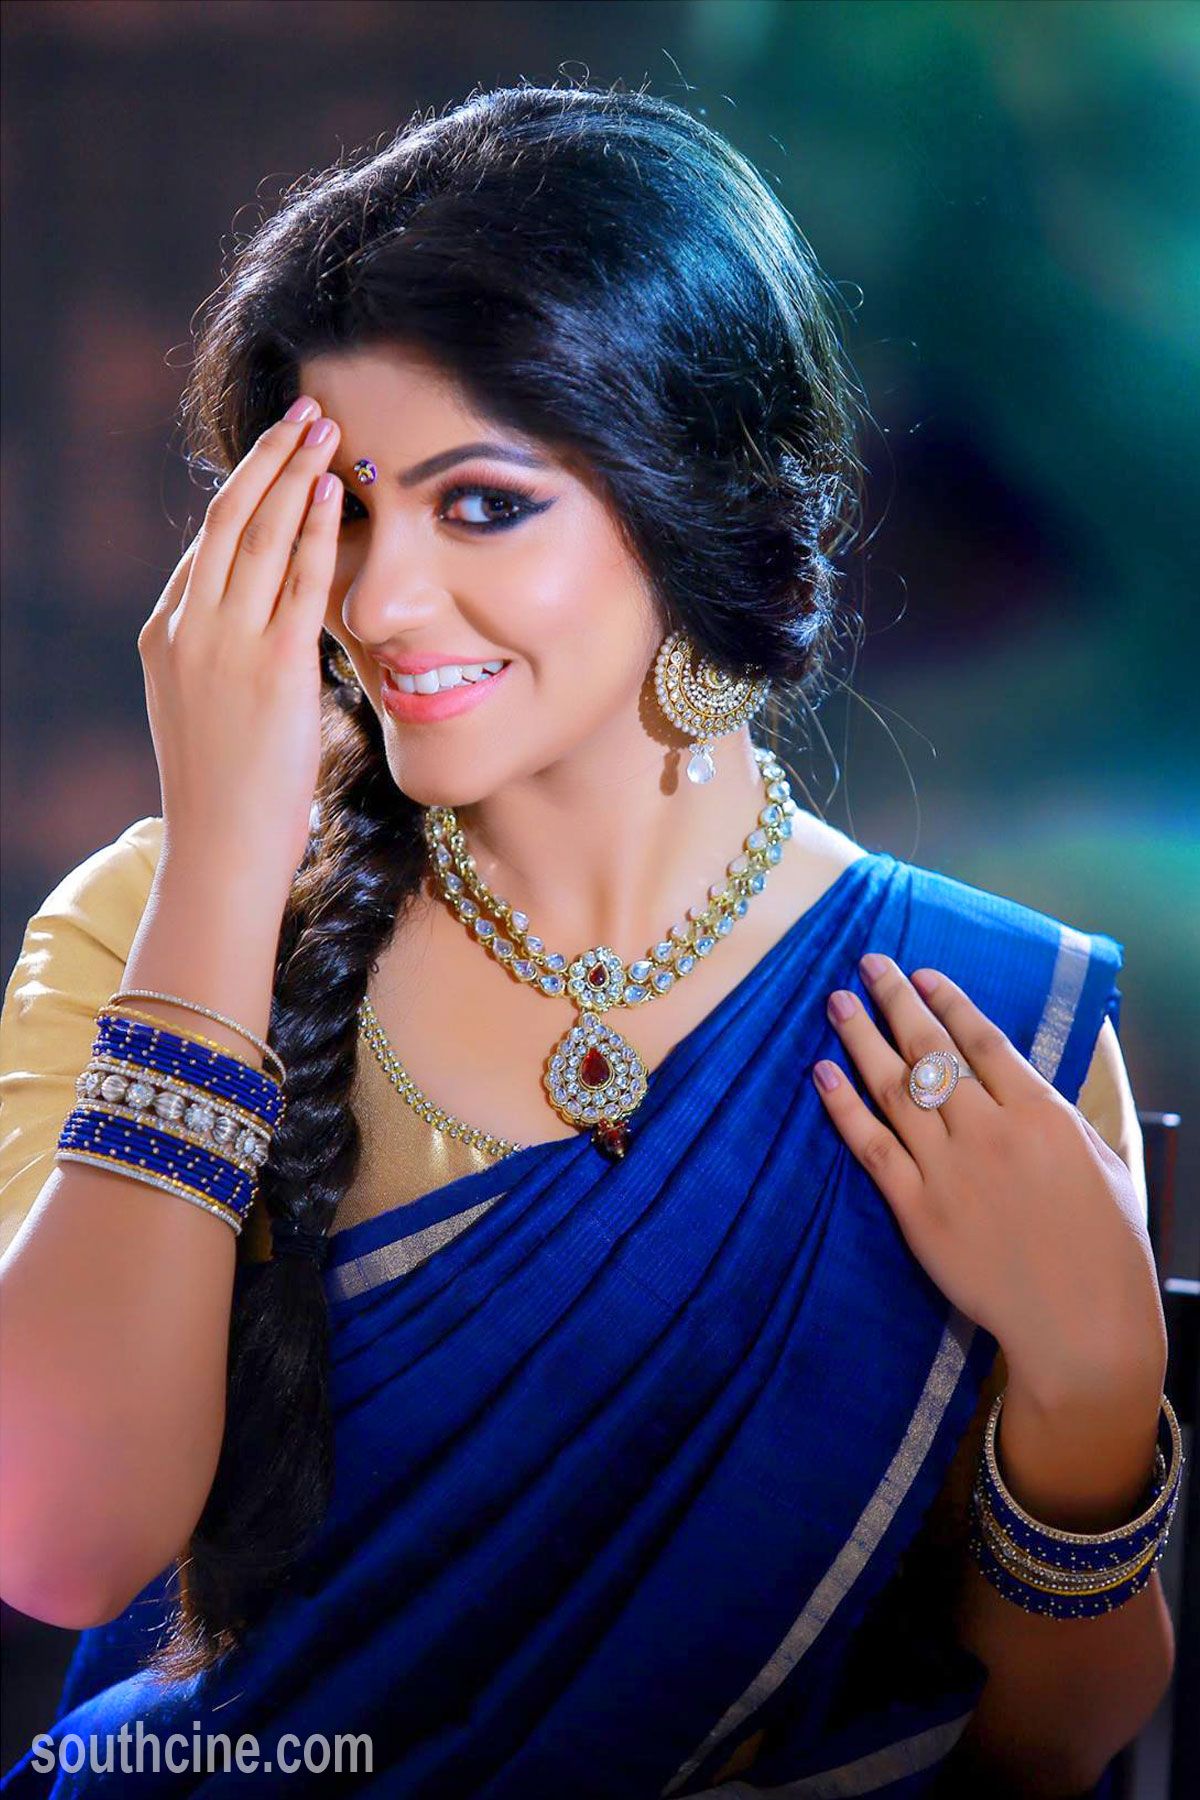 Tamil Actress Mobile Wallpapers - Wallpaper Cave